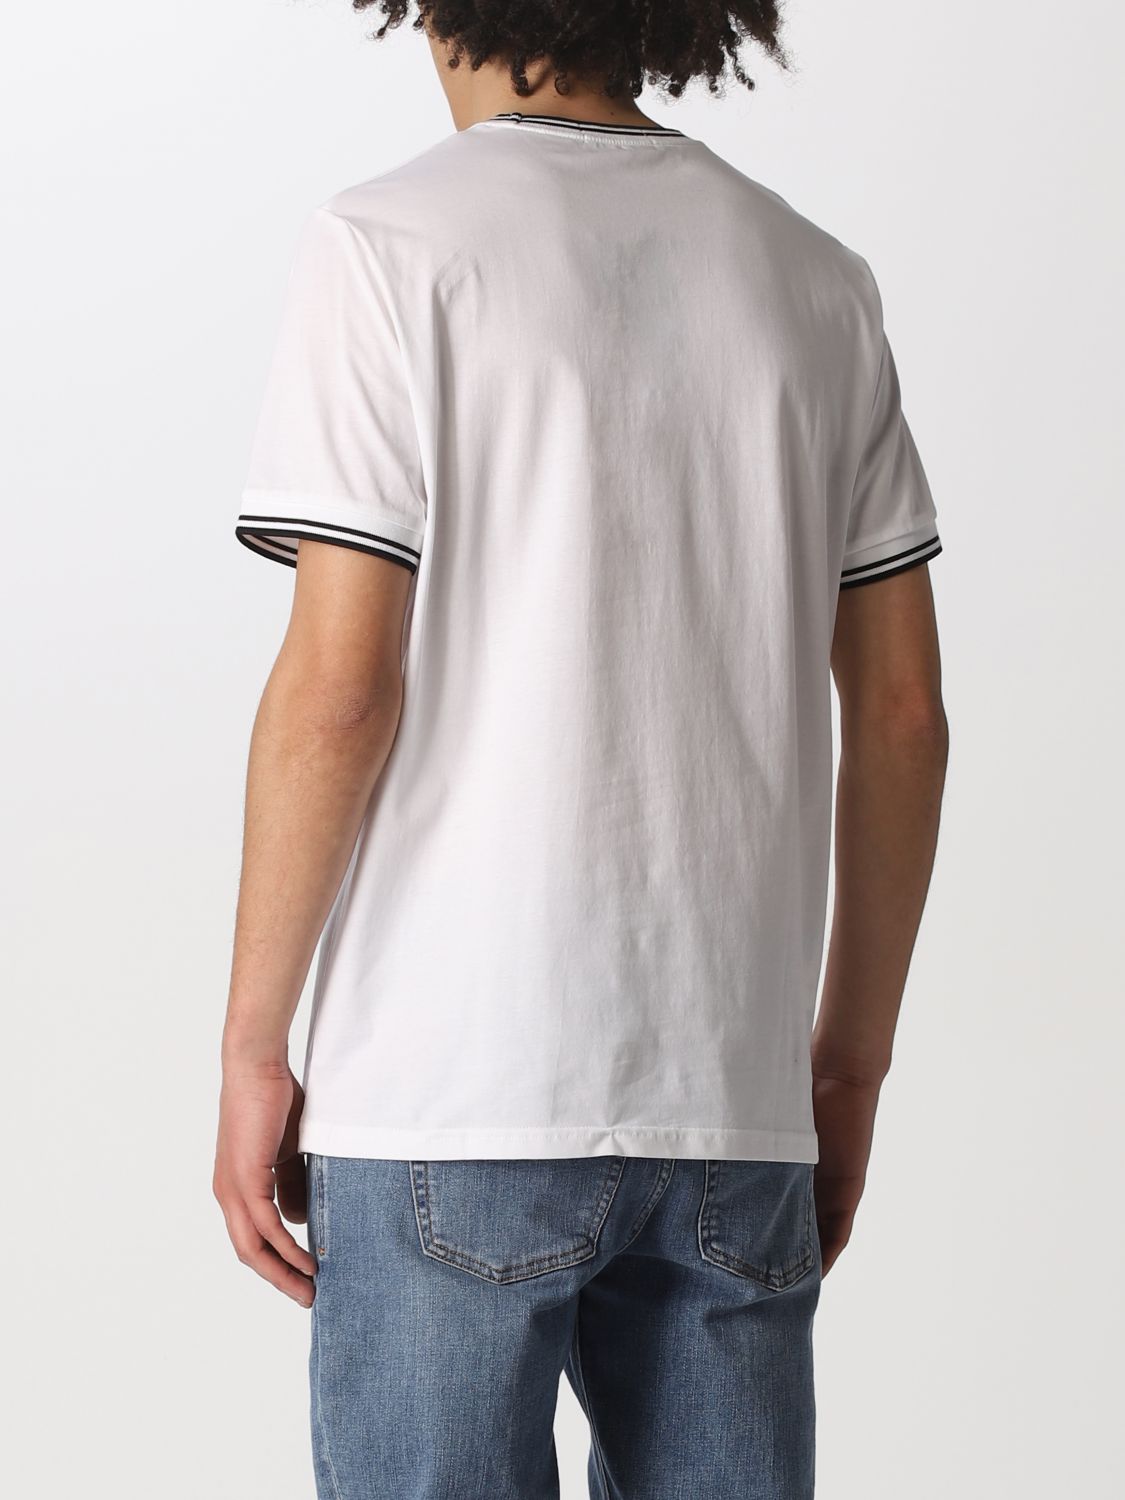 Tシャツ Fred Perry: Tシャツ メンズ Fred Perry ホワイト 2